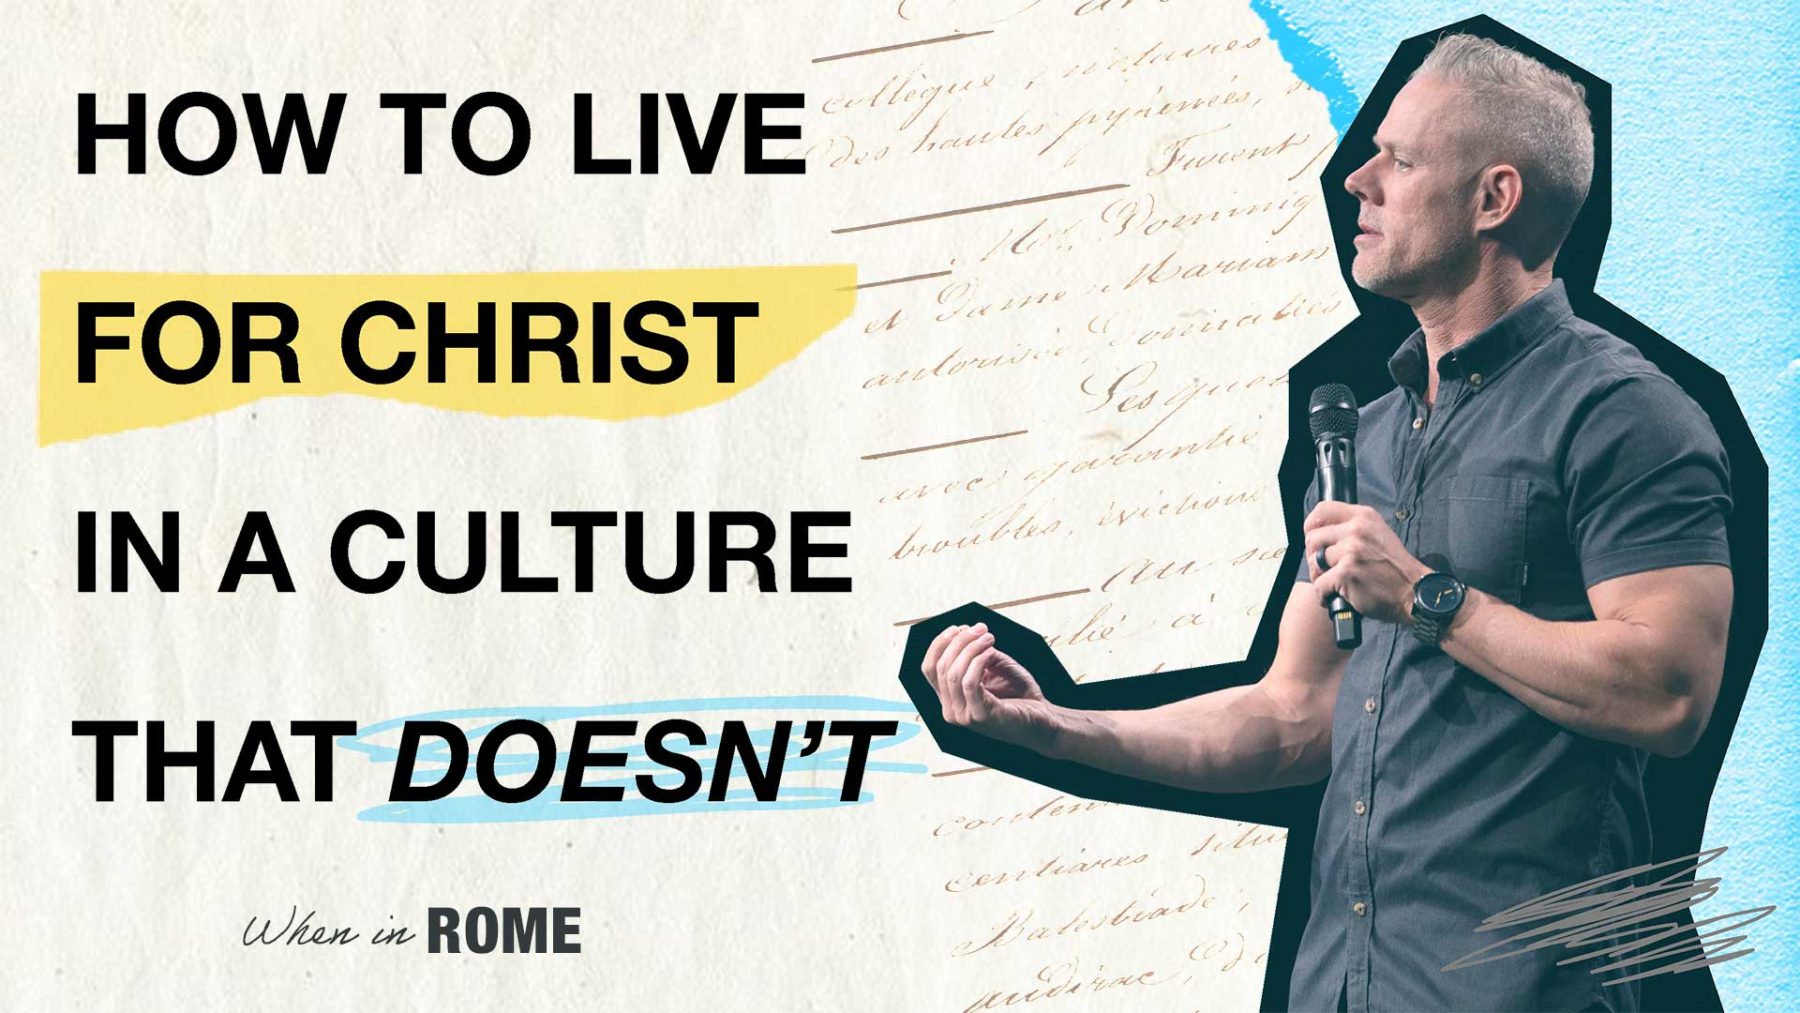 How to Live for Christ in a Culture That Doesn’t